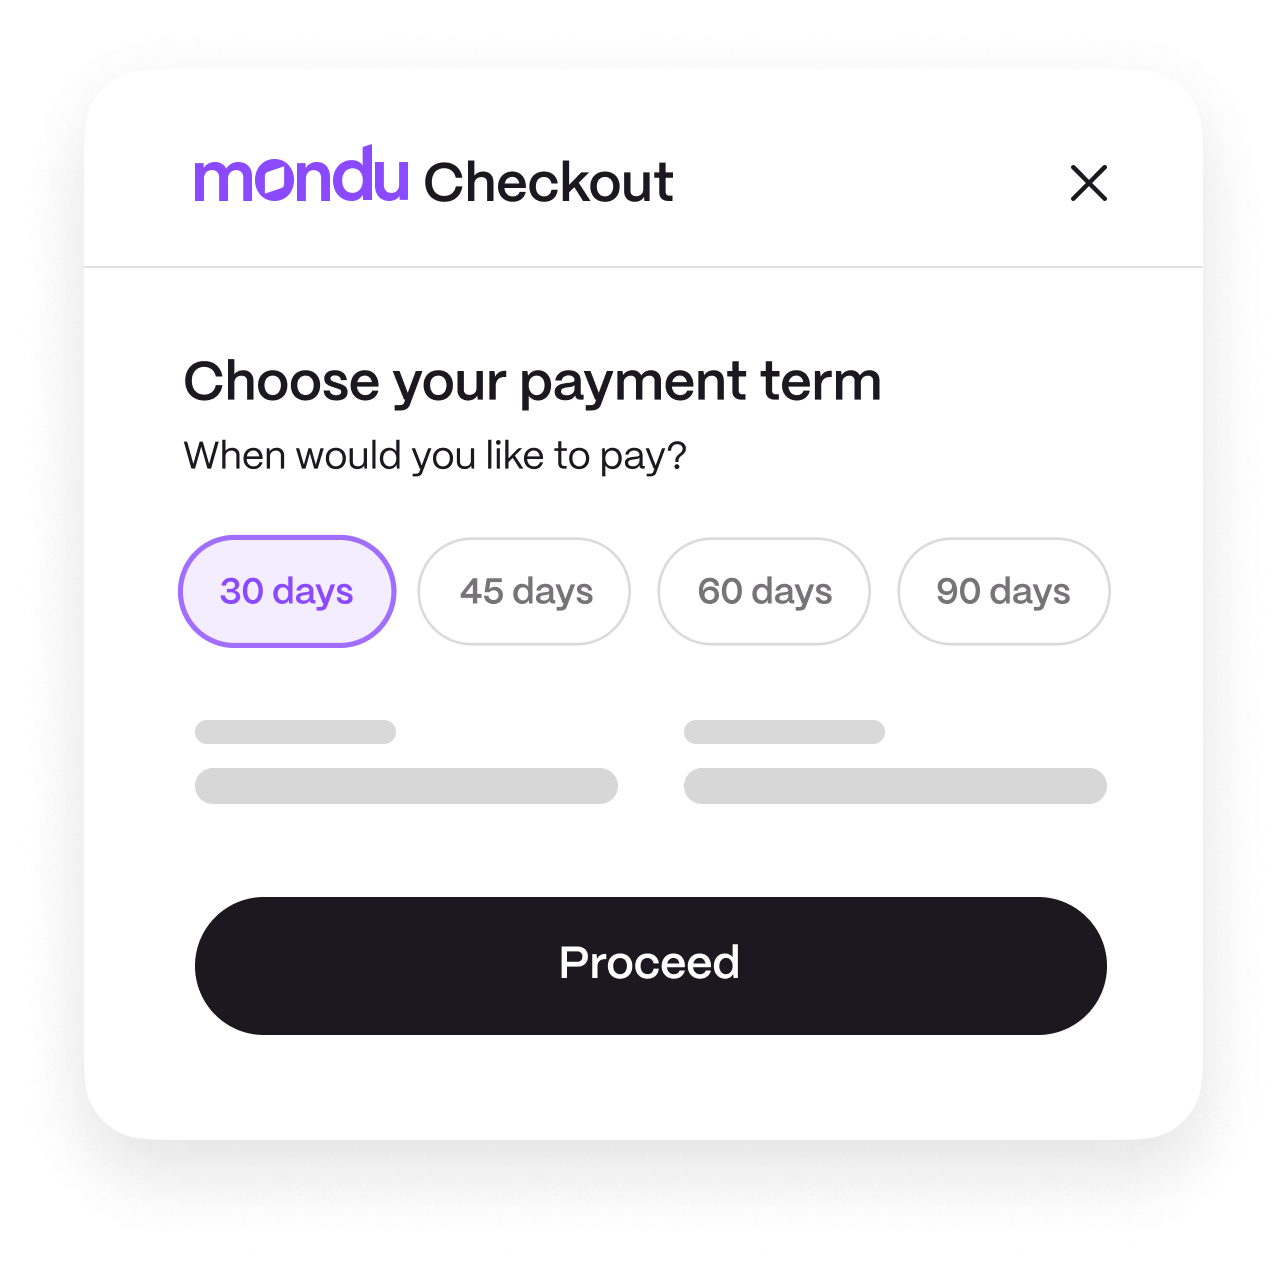 B2B buyers can select from 30, 45, 60 or 90 day payment terms with Mondu.